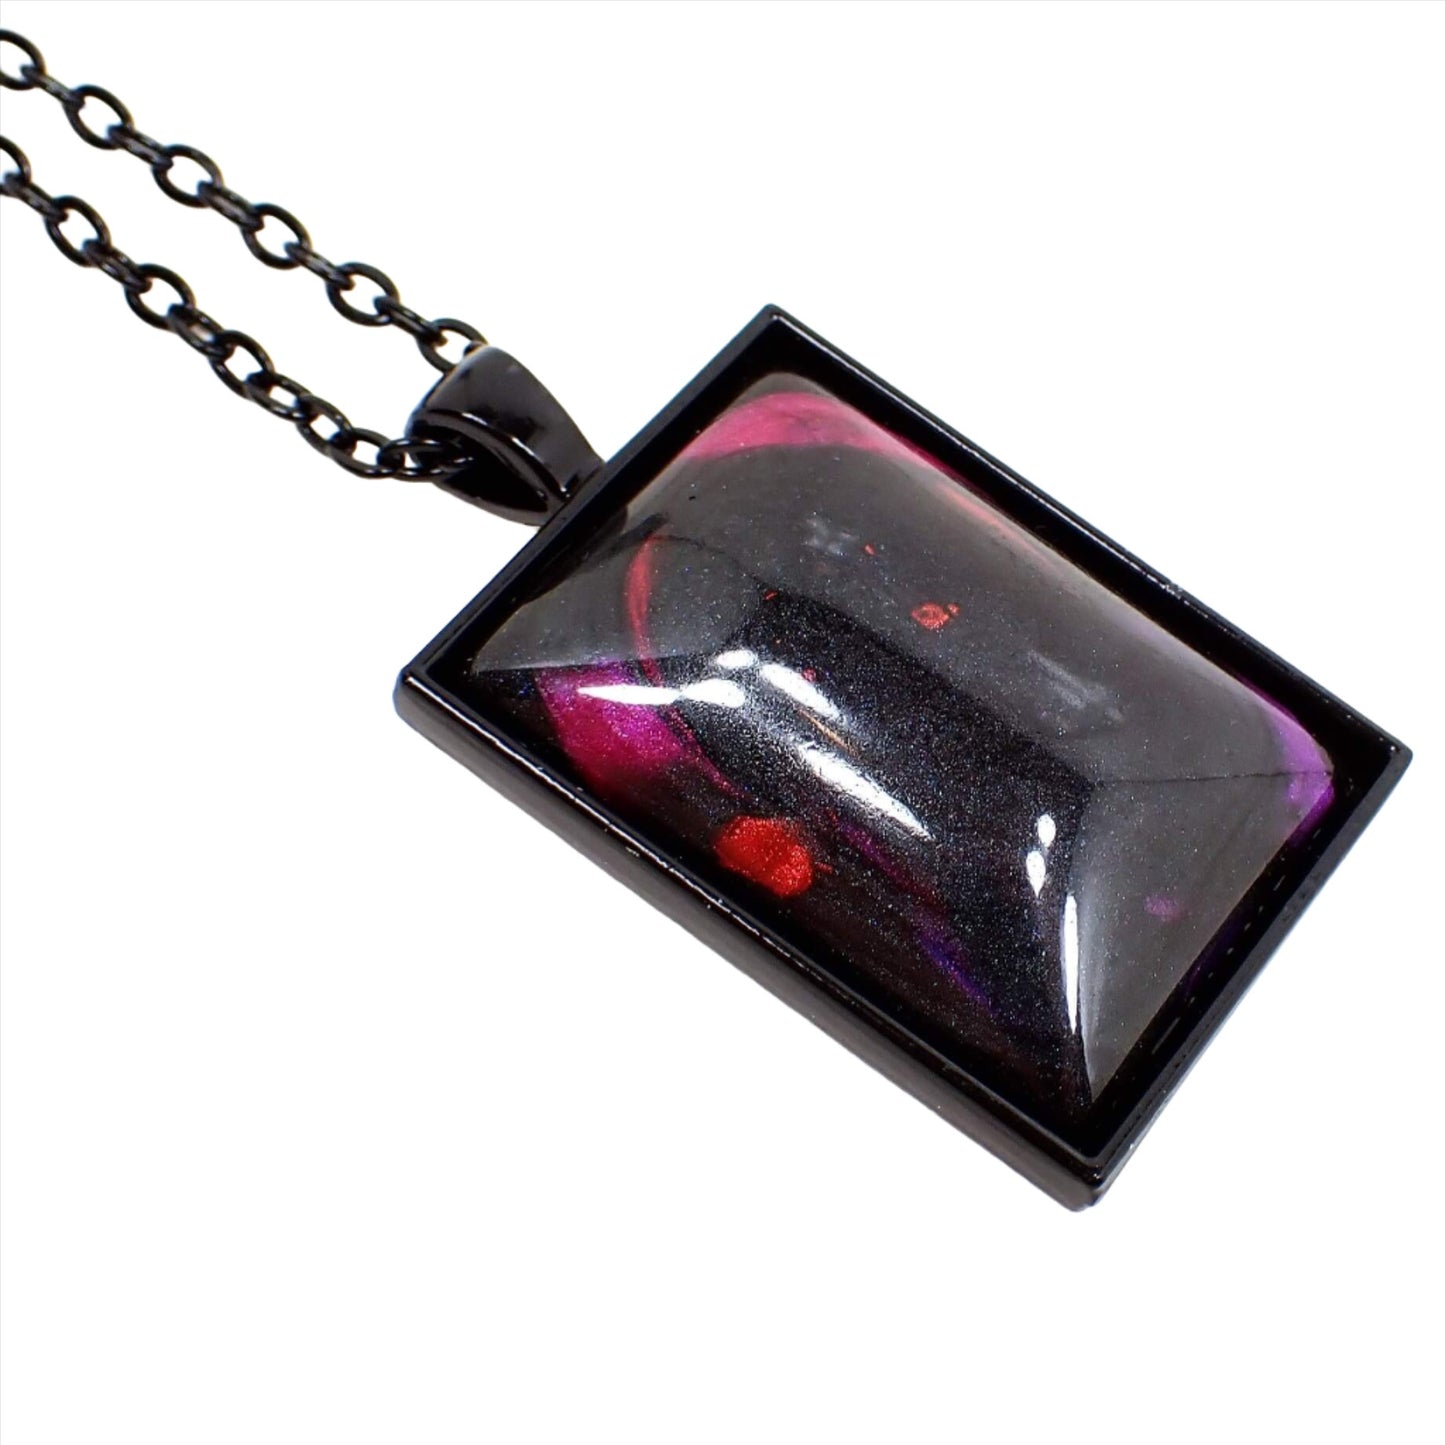 Angled enlarged view of the handmade Goth large rectangle pendant necklace. The chain and setting are black in color. There is a large rectangle pendant with a pearly black domed resin cab. There are splashes of bright pearly pink, red, purple, and blue here and there on the pendant.